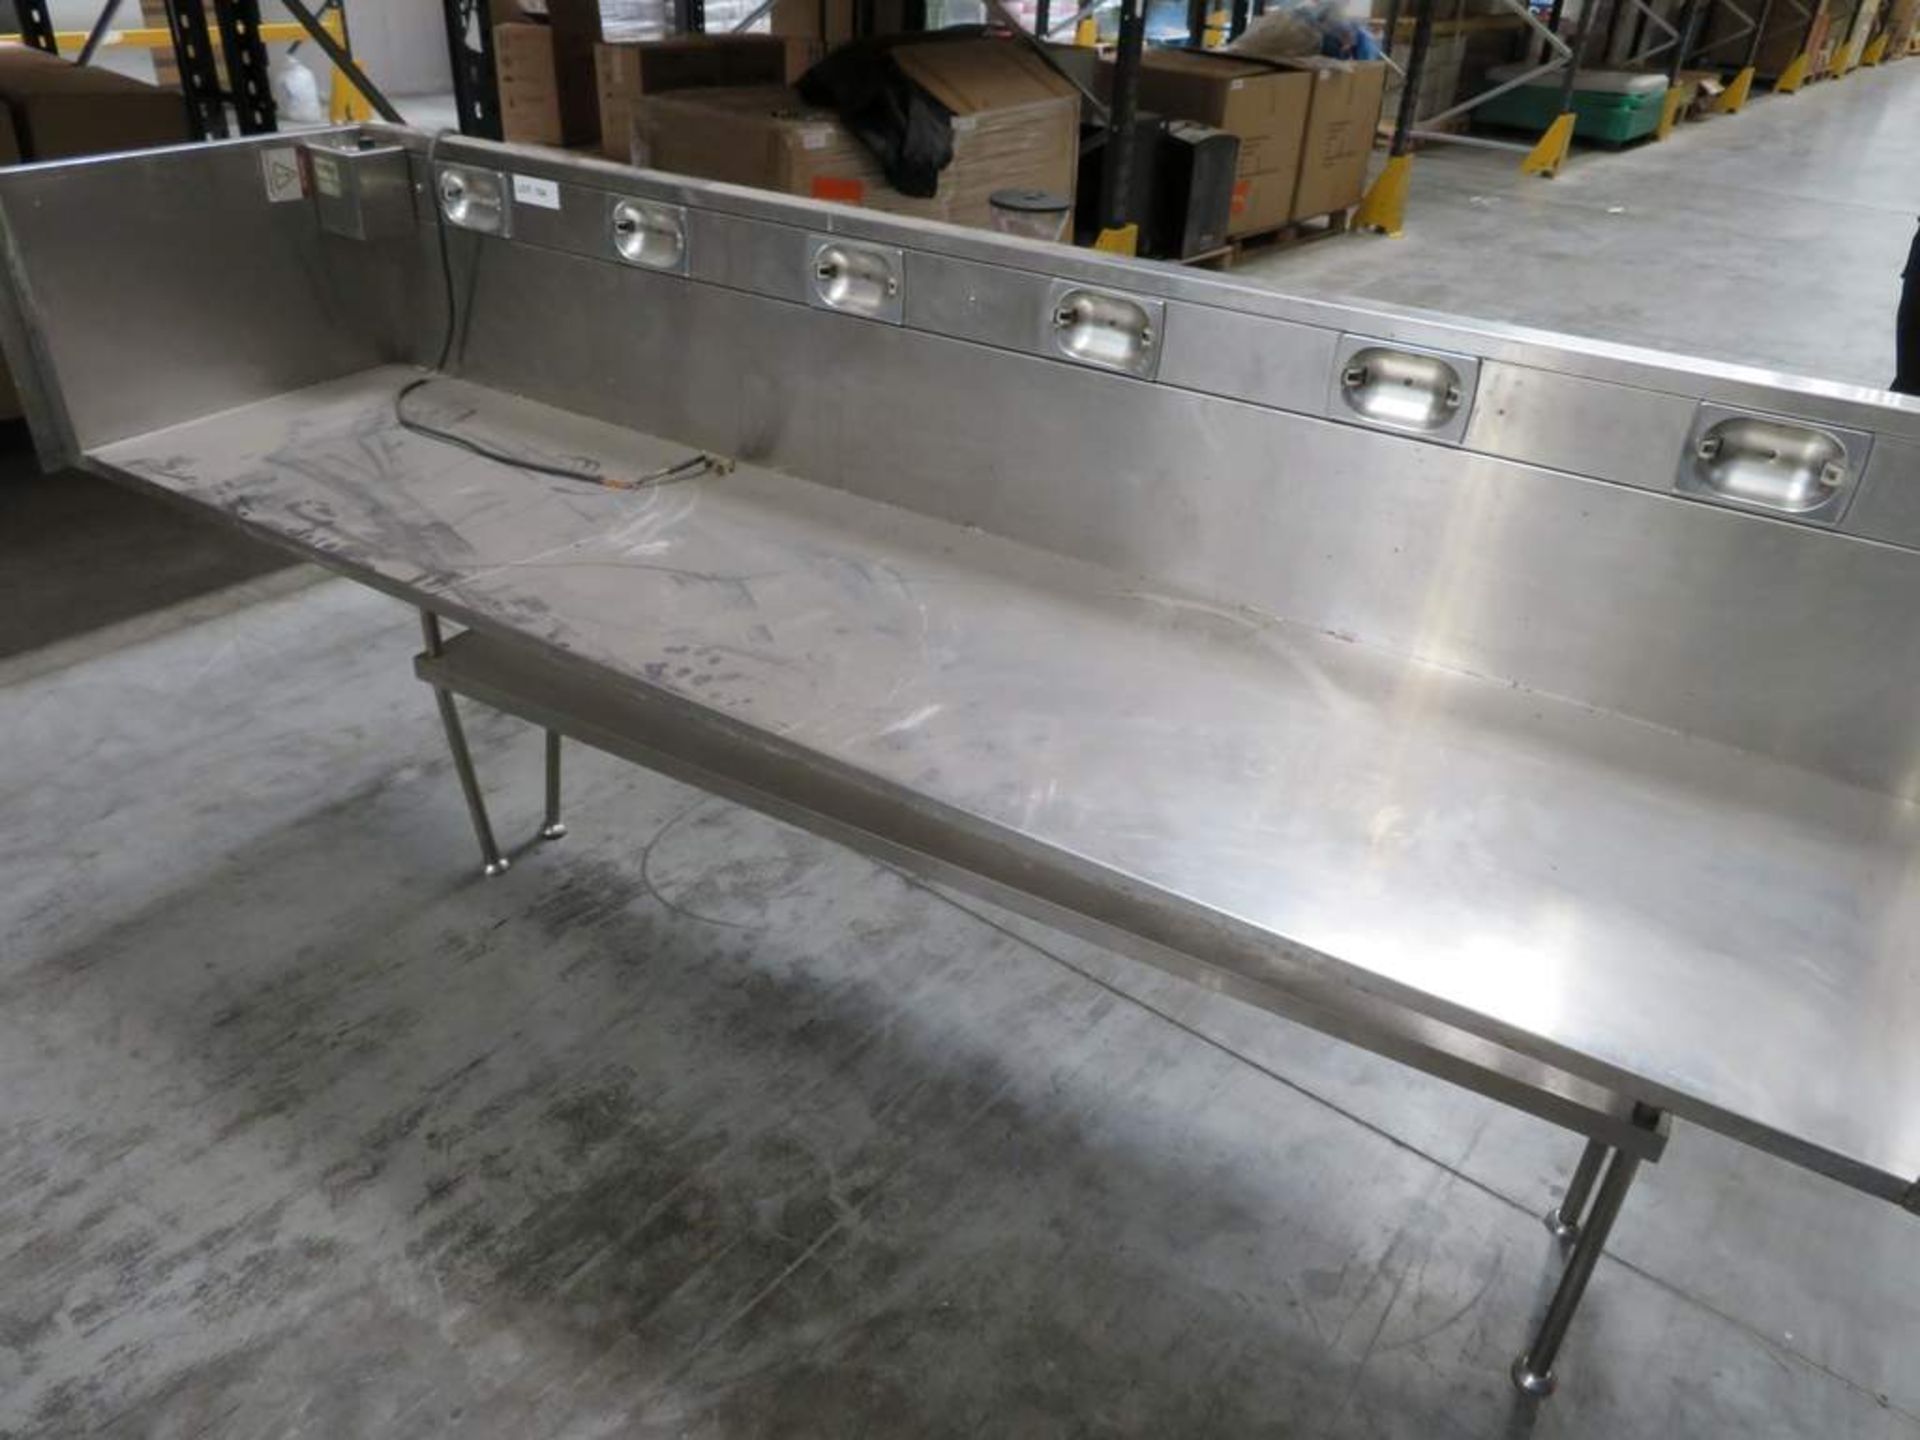 Stainless steep canopy, Counterline stainless steel 2 tier stand and various stainless steel items.